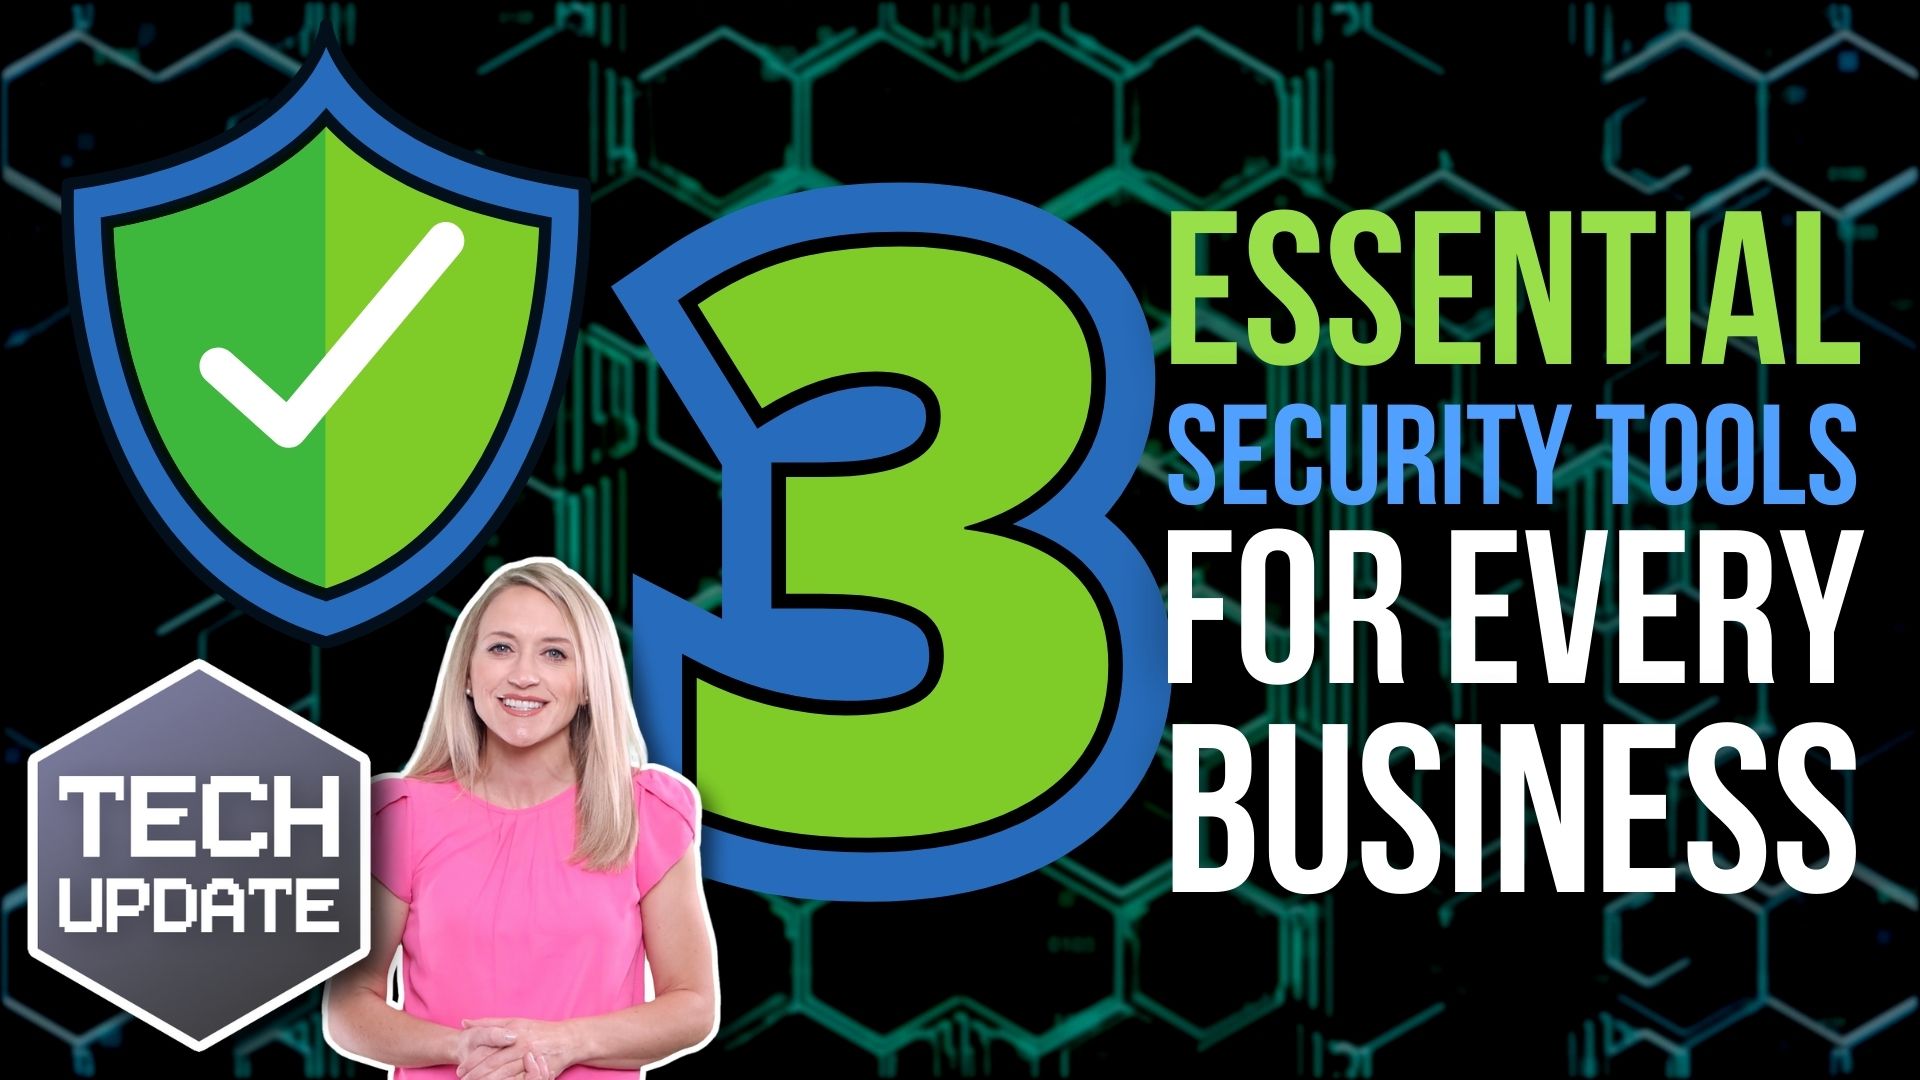 3 essential IT Support tools for every business.